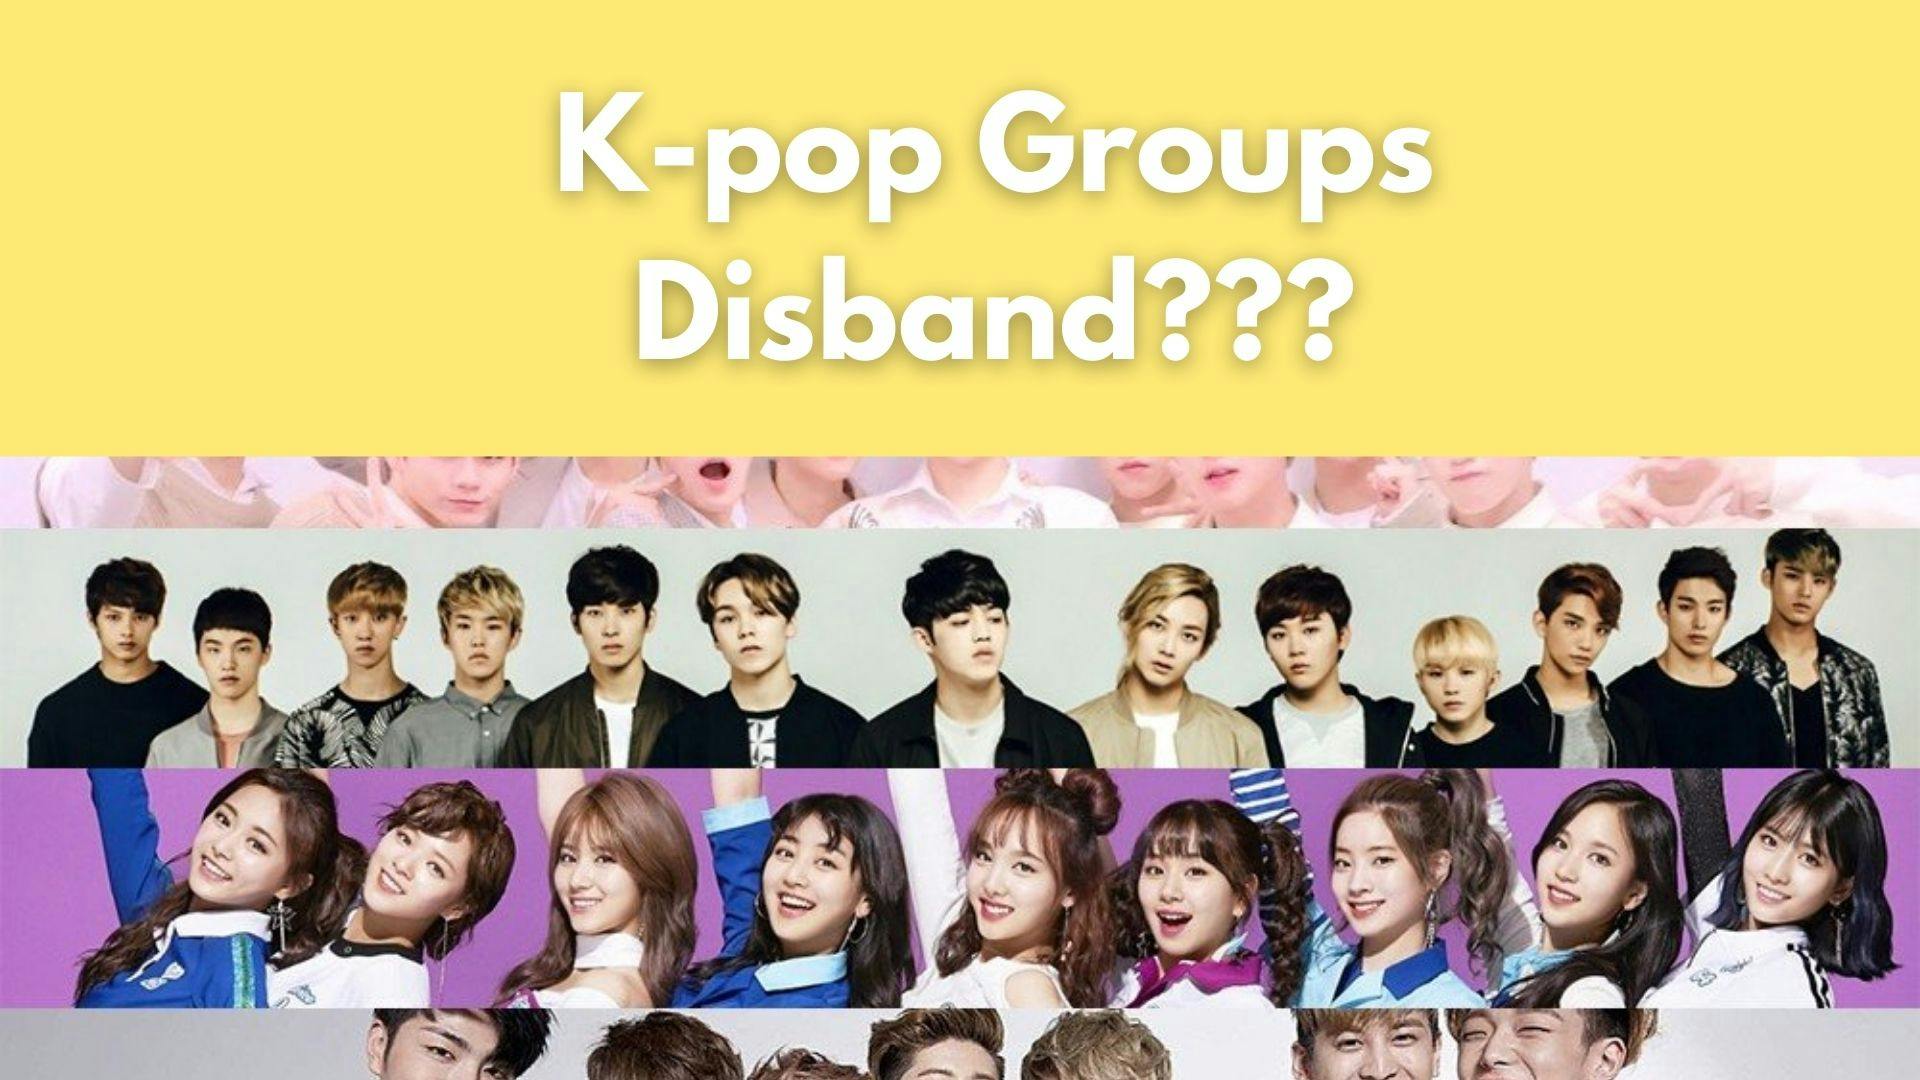 K-pop groups that are likely to get disbanded in 2022